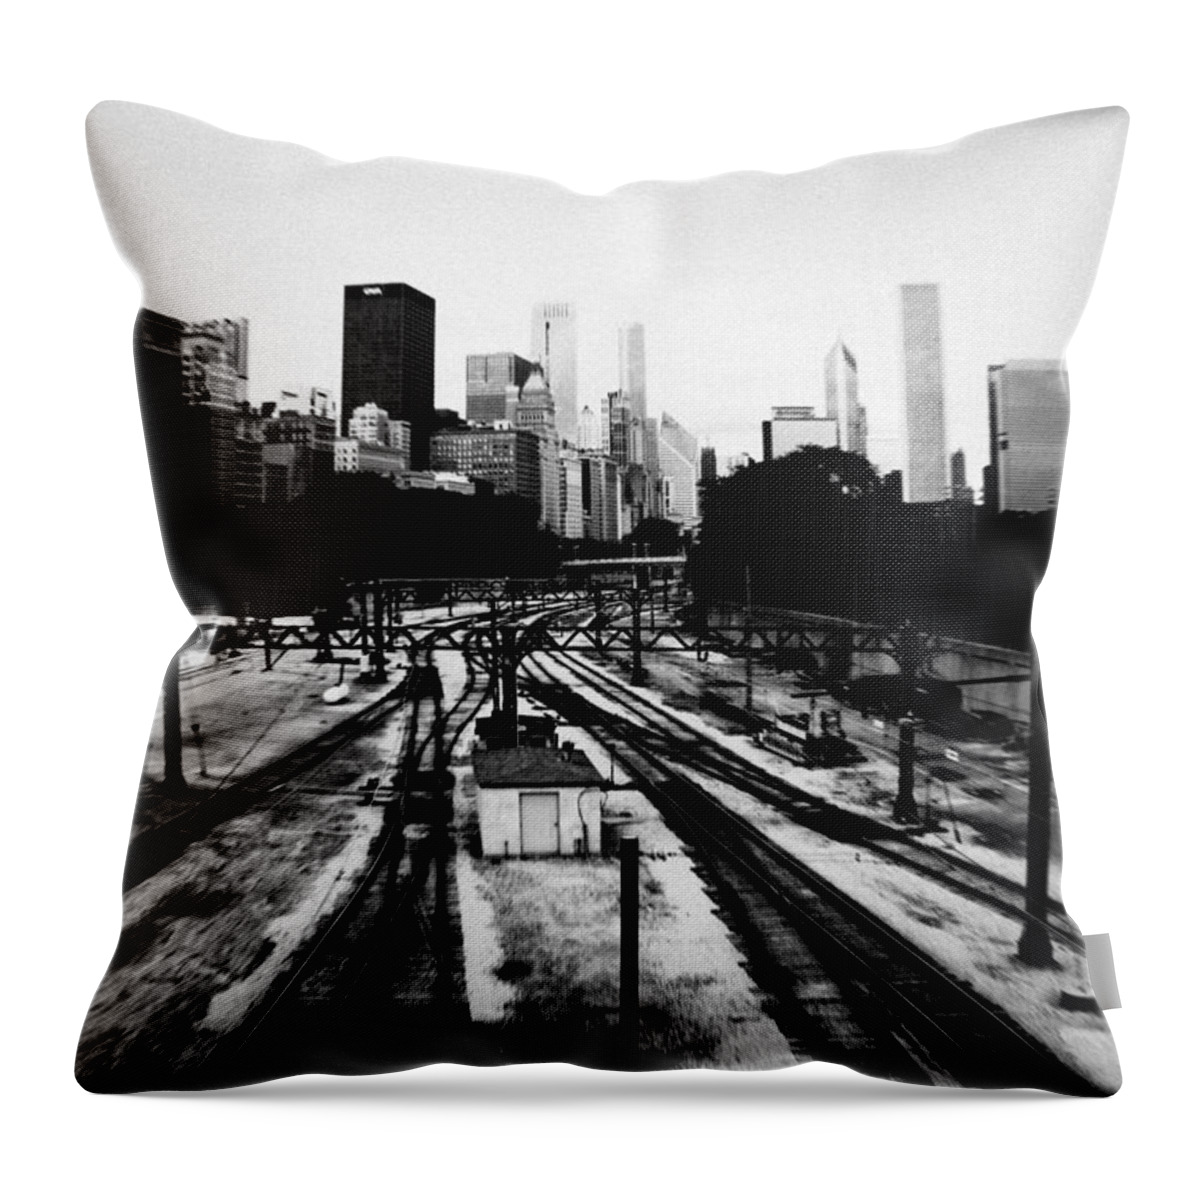 Chicago Throw Pillow featuring the photograph Chicago Grant Park Railroad Skyline by Kyle Hanson